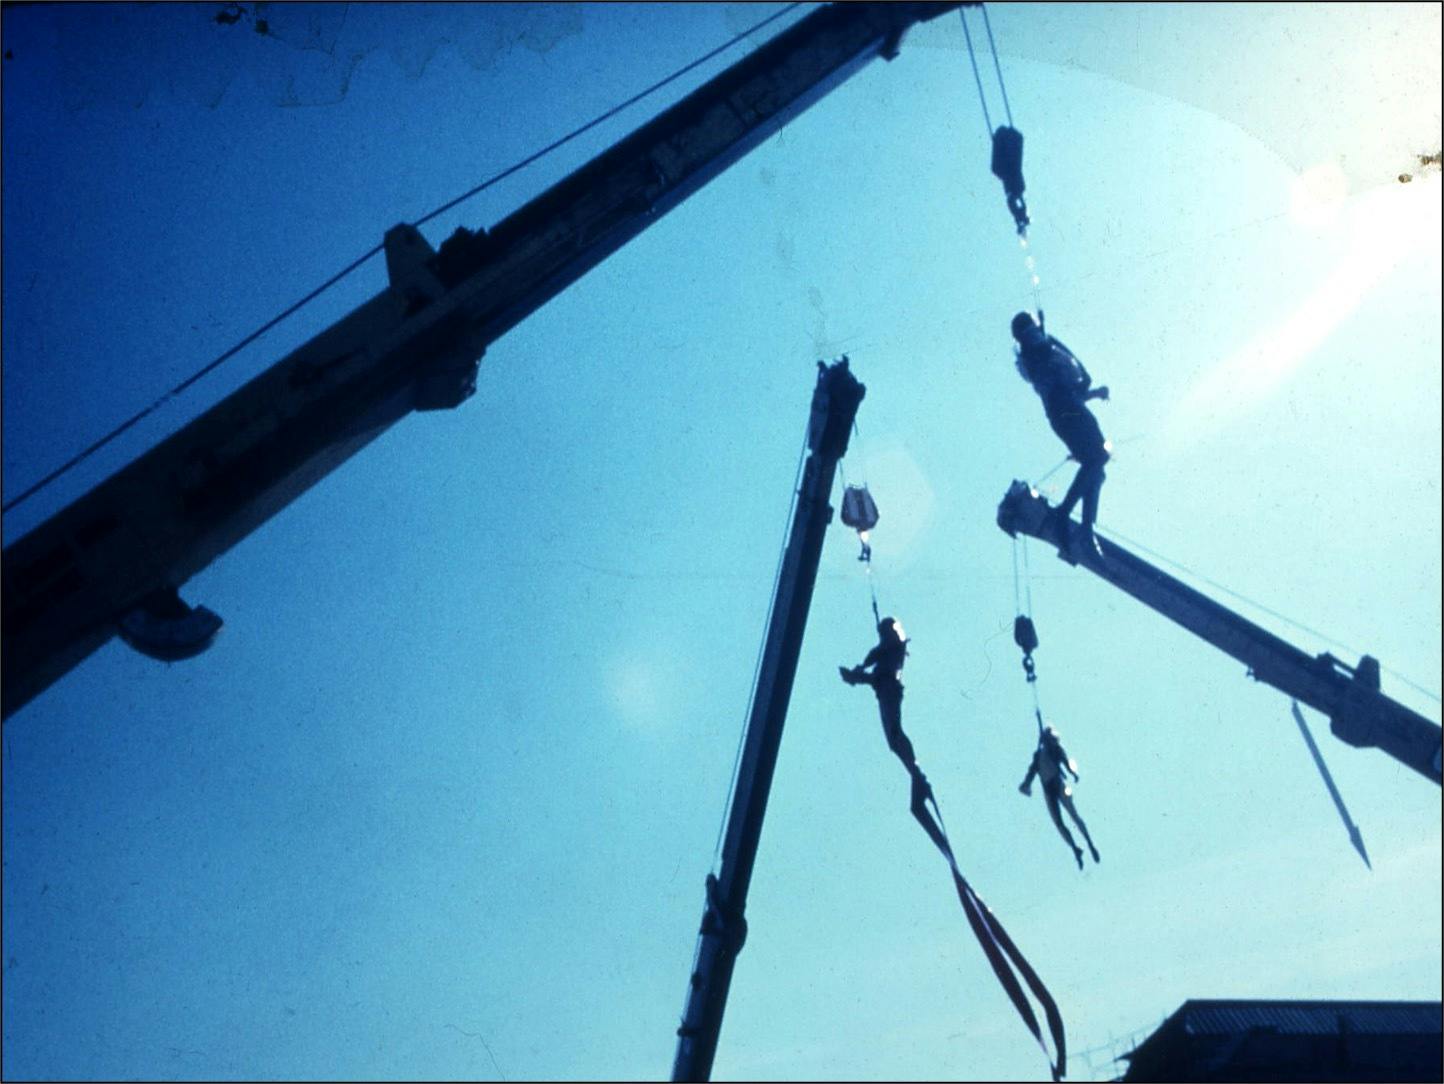 A blue-tinted, high-contrast photograph taken from below. The image shows the silhouettes of three performers, suspended in the air by harnesses attached to the arms of three mobile cranes. The performers hang from their respective cranes at a distance and separated from one another.